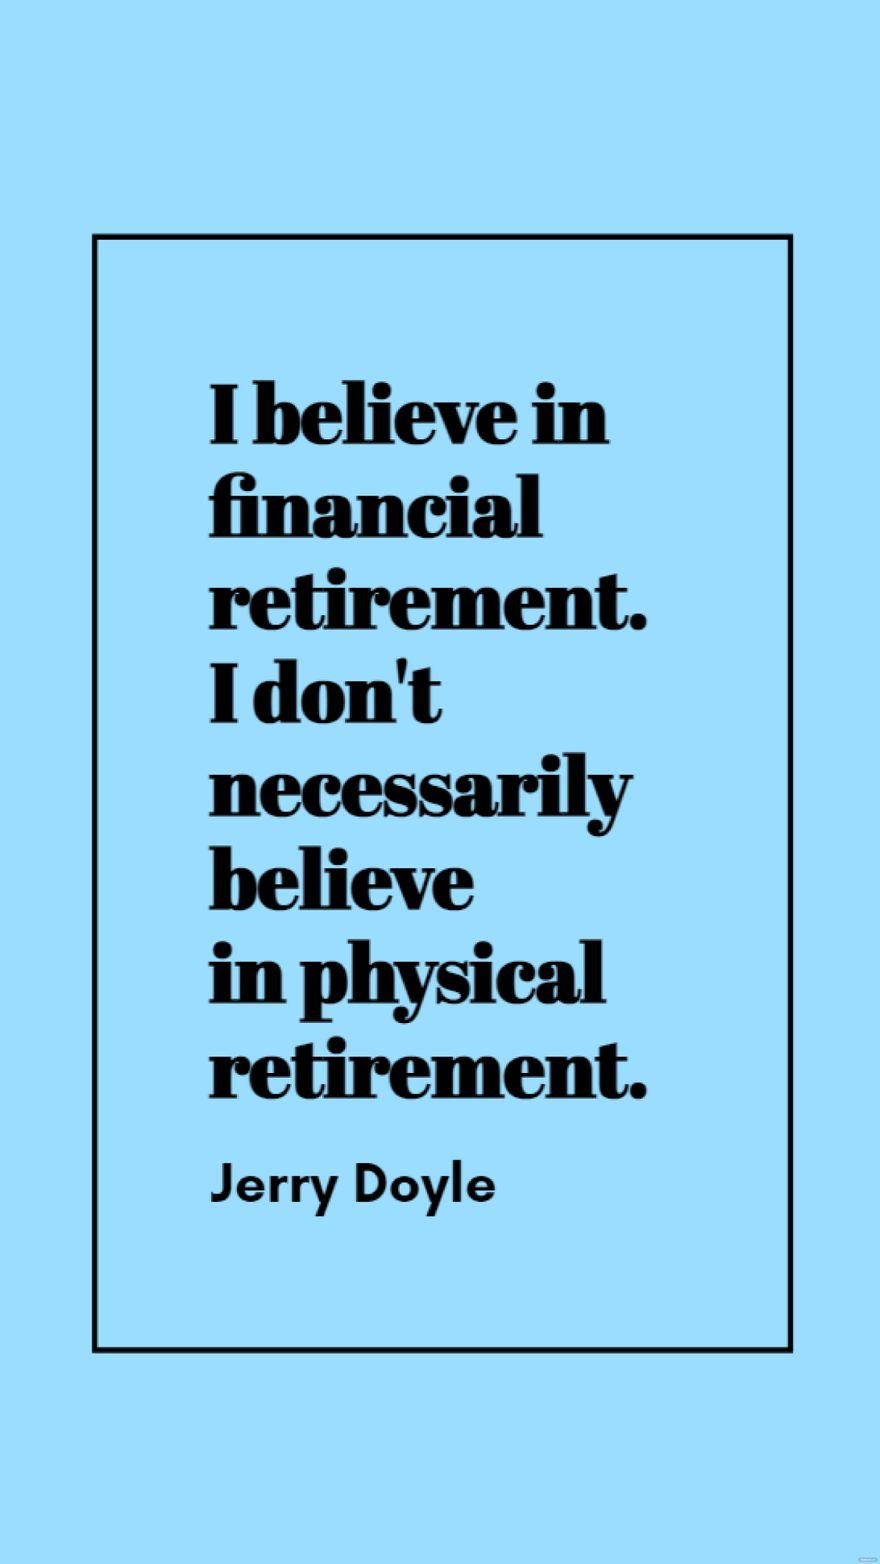 Free Jerry Doyle - I believe in financial retirement. I don't necessarily believe in physical retirement.